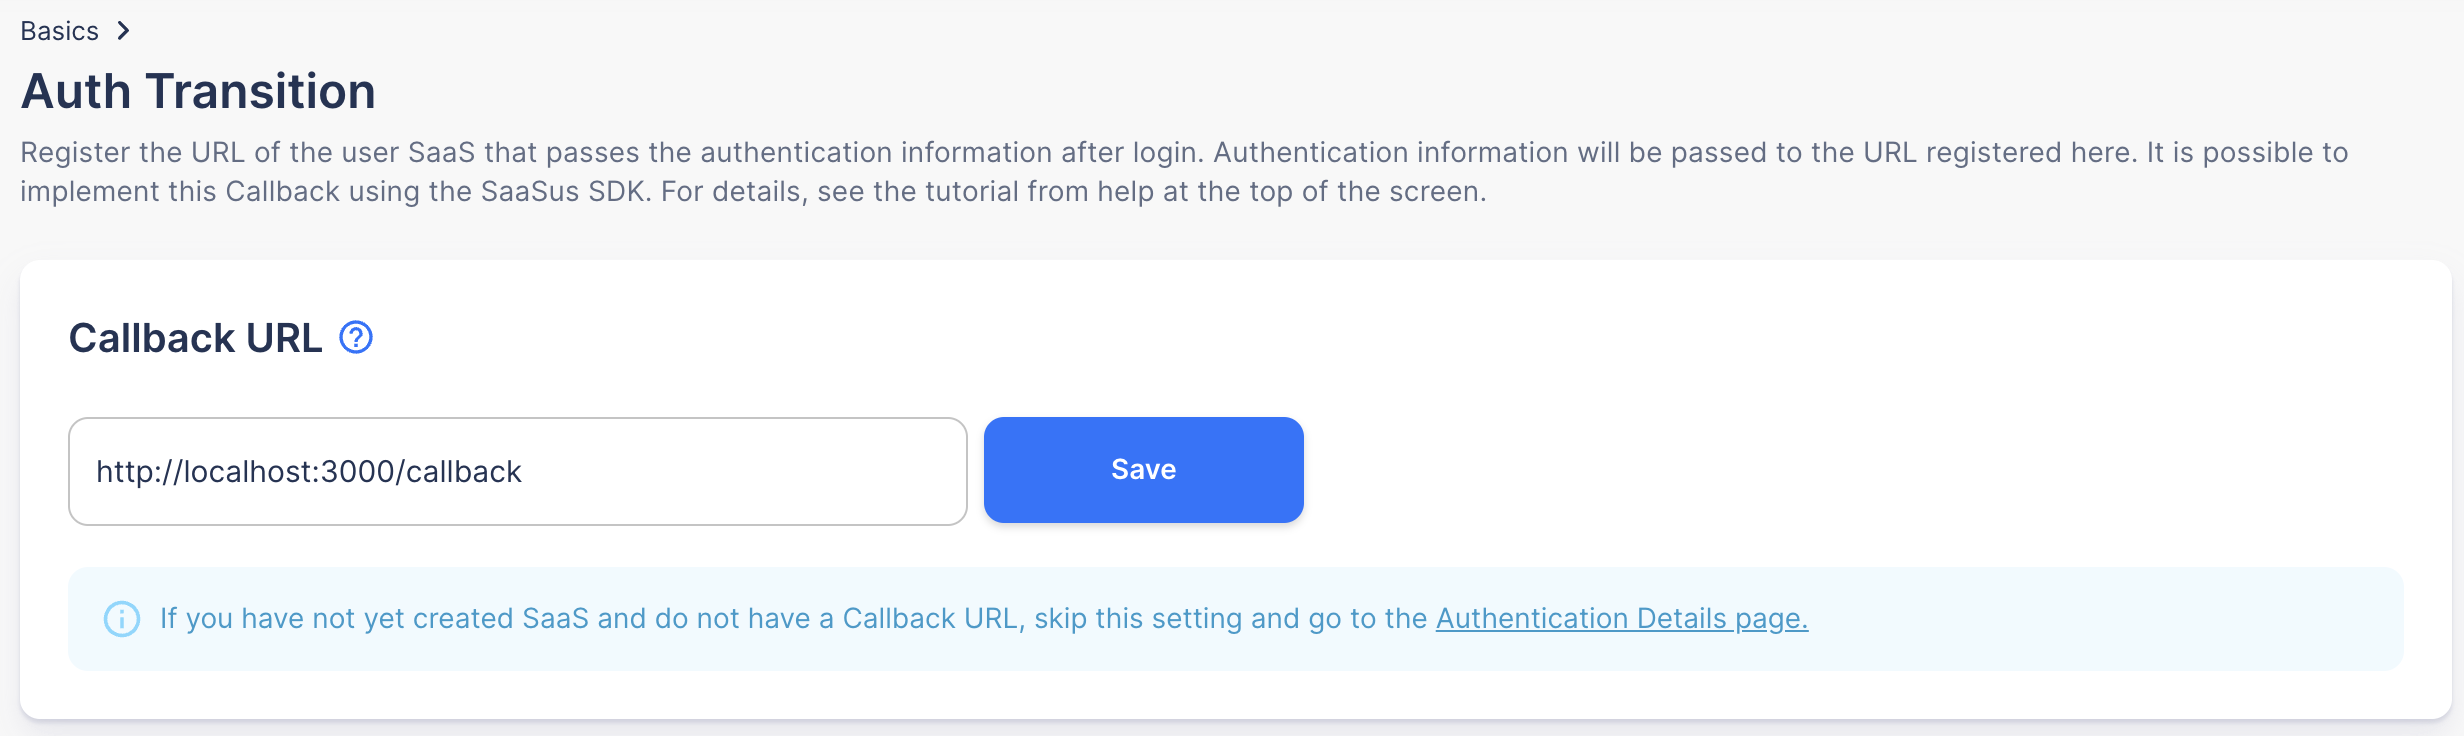 Post-Authentication Redirect